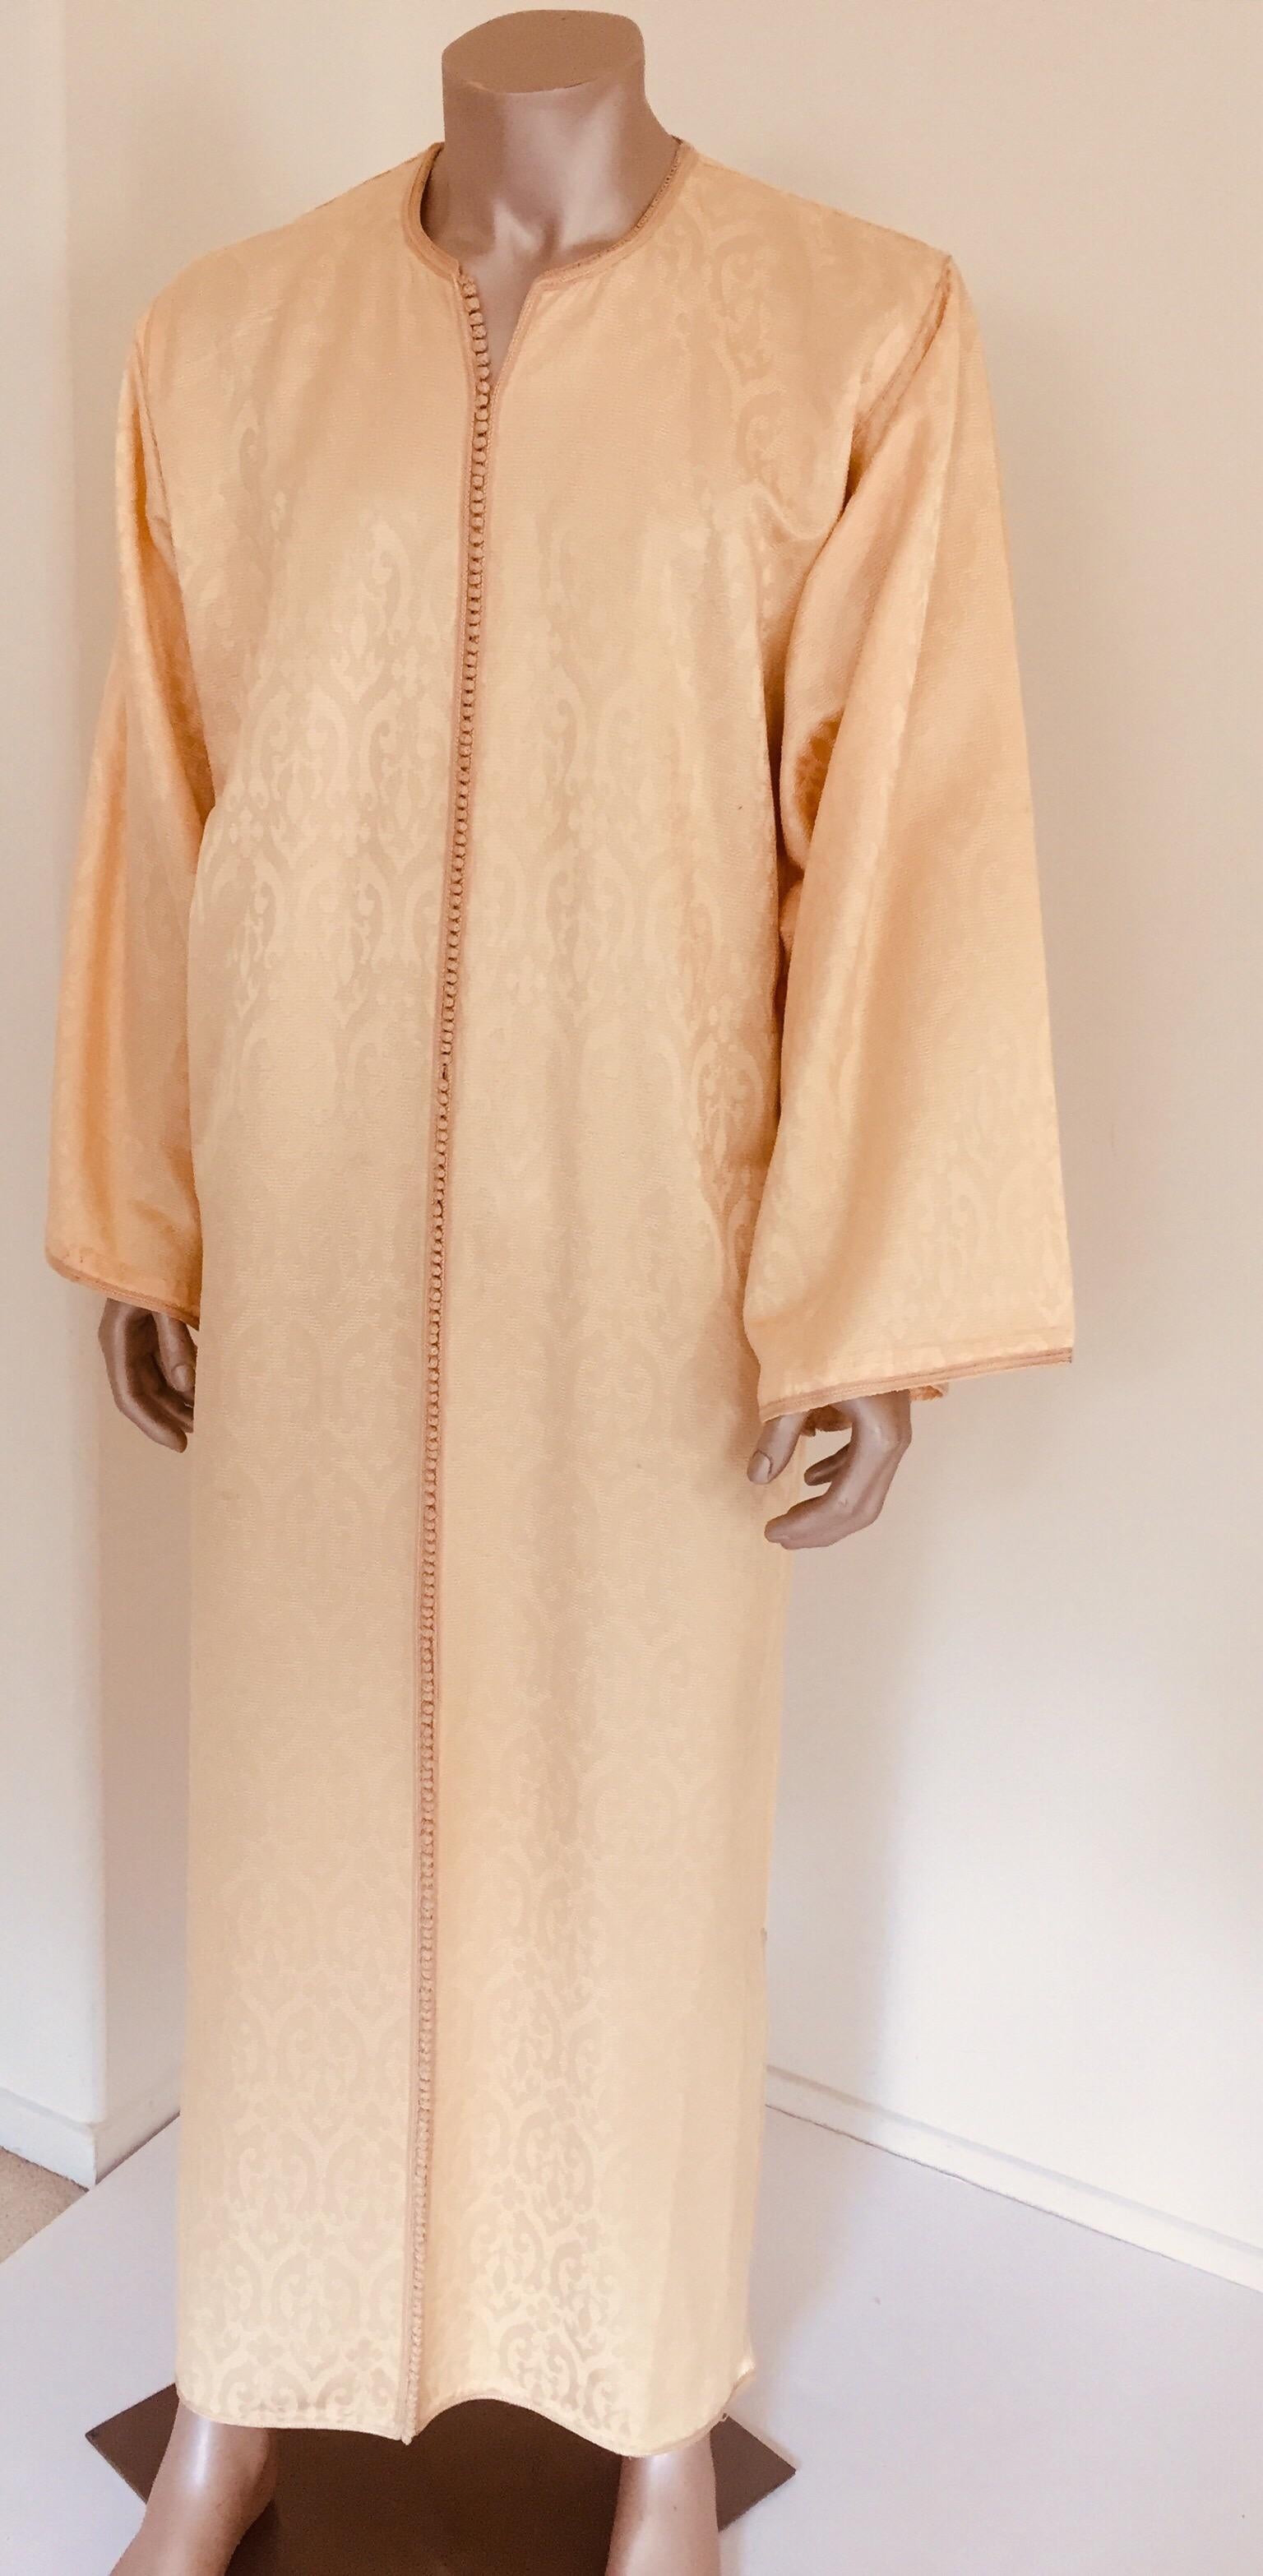 Elegant Moroccan caftan yellow gold color embroidered with gold trim,
circa 1960s.
This long maxi dress kaftan is embroidered and embellished with traditional designs in gold.
One of a kind custom evening Moroccan Middle Eastern gown.
The kaftan